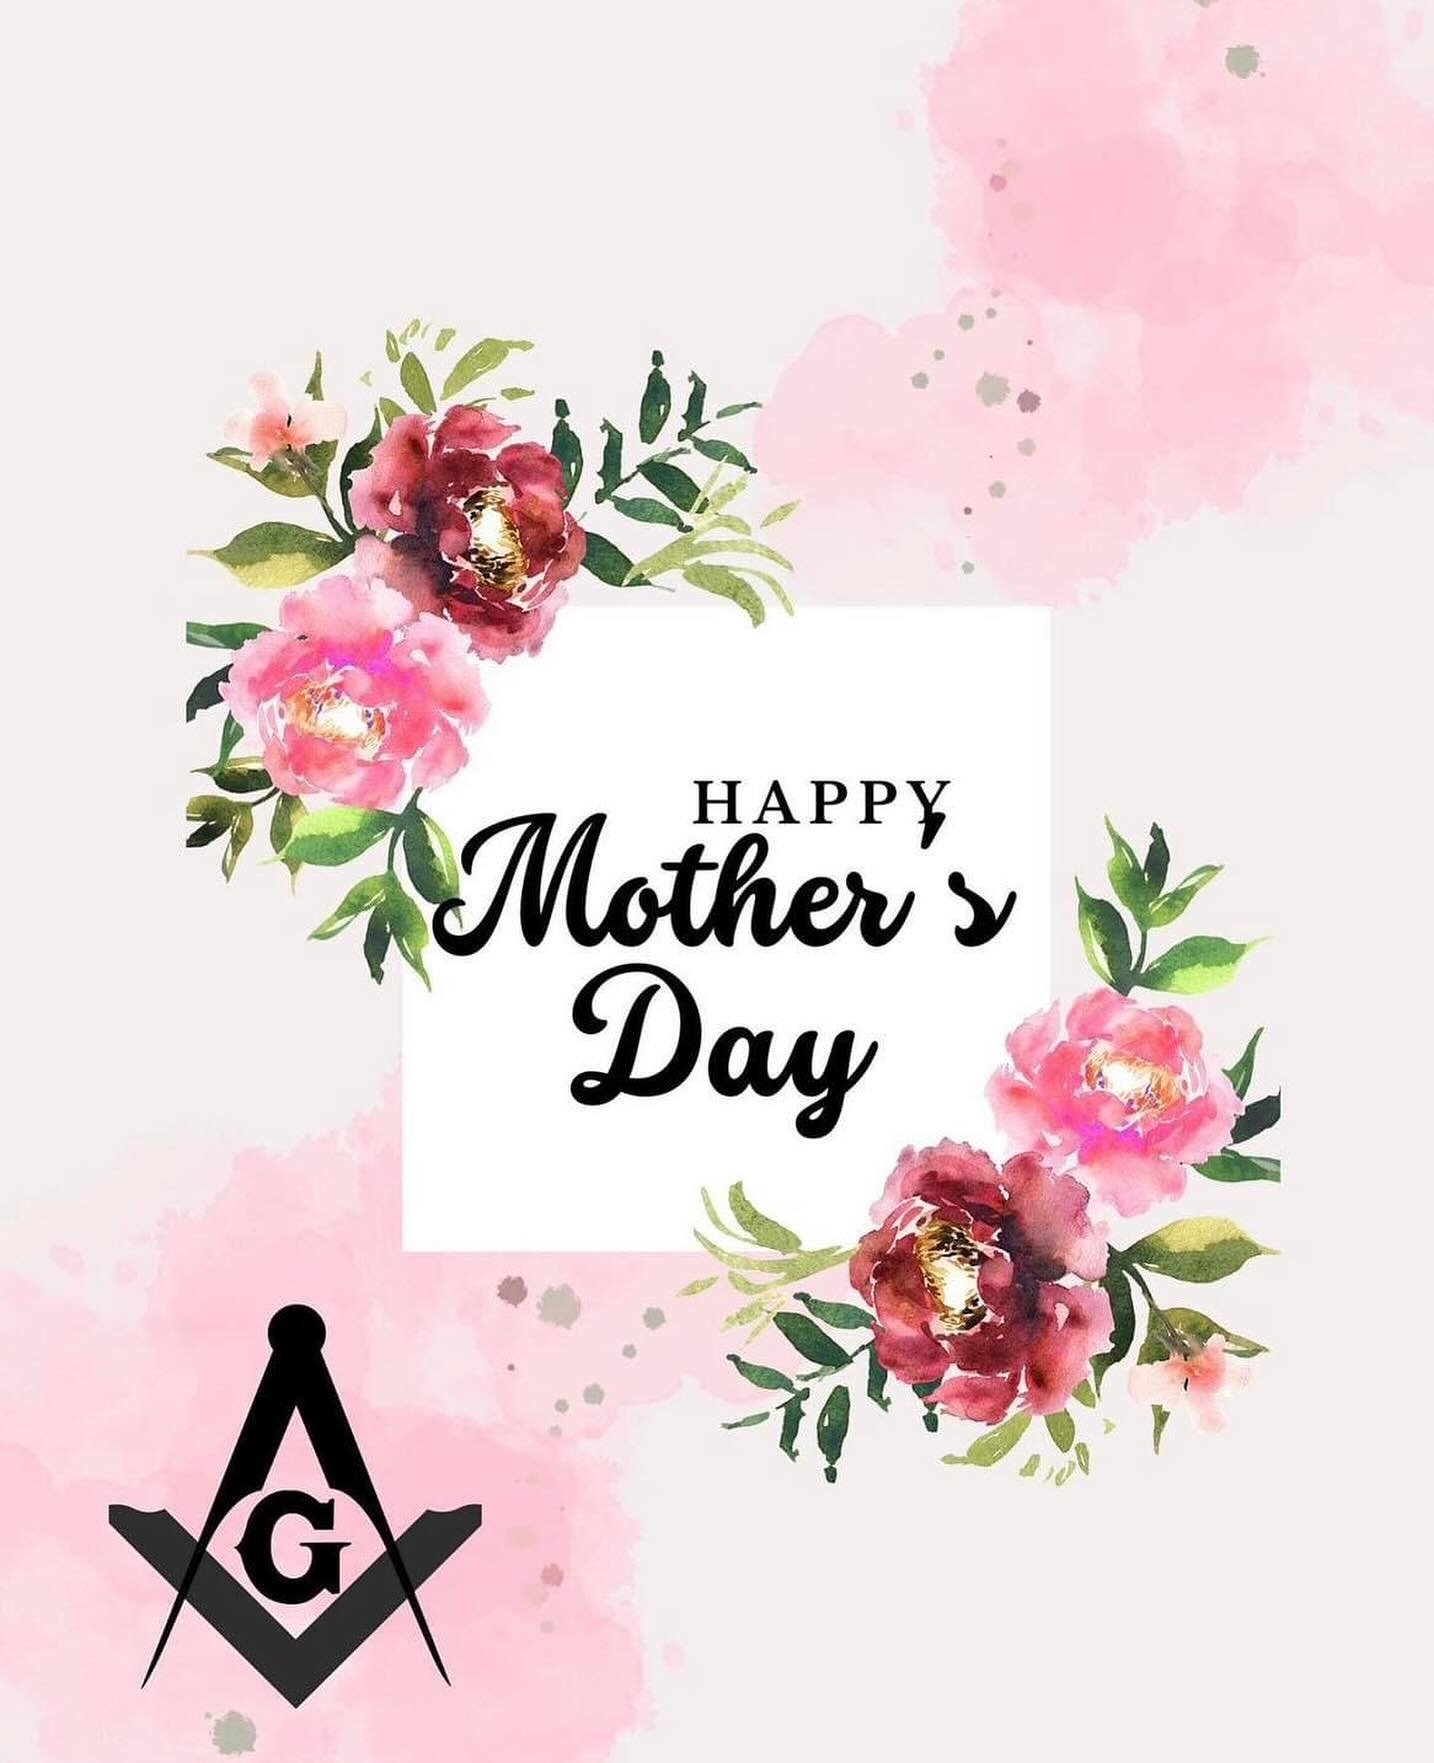 Happy Mother&rsquo;s Day to all Mothers from all of us at ESSEX LODGE!!!!!